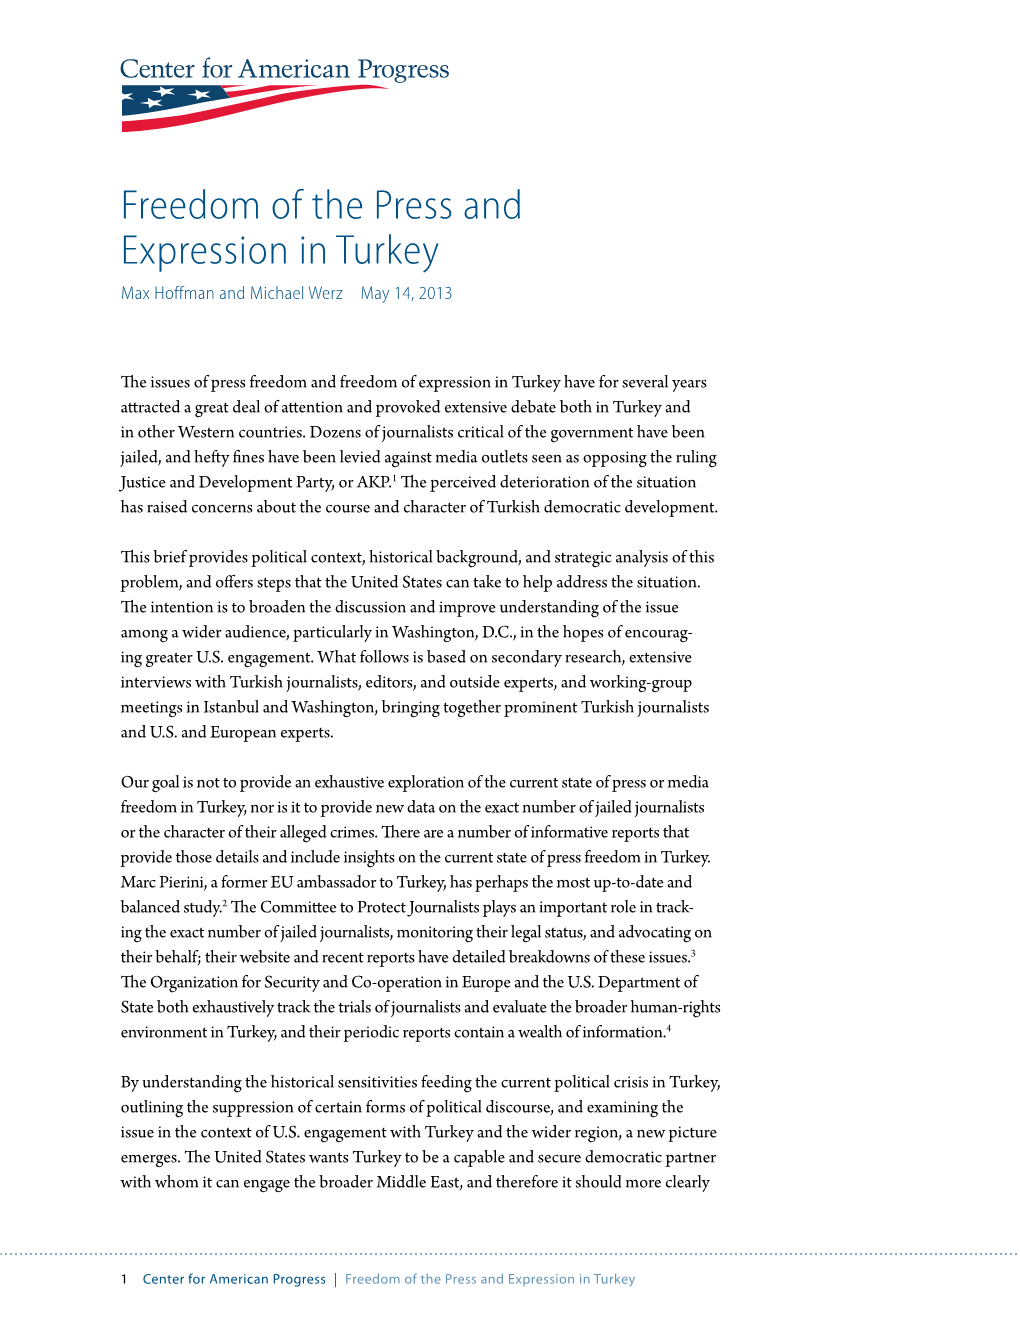 Freedom of the Press and Expression in Turkey Max Hoffman and Michael Werz May 14, 2013